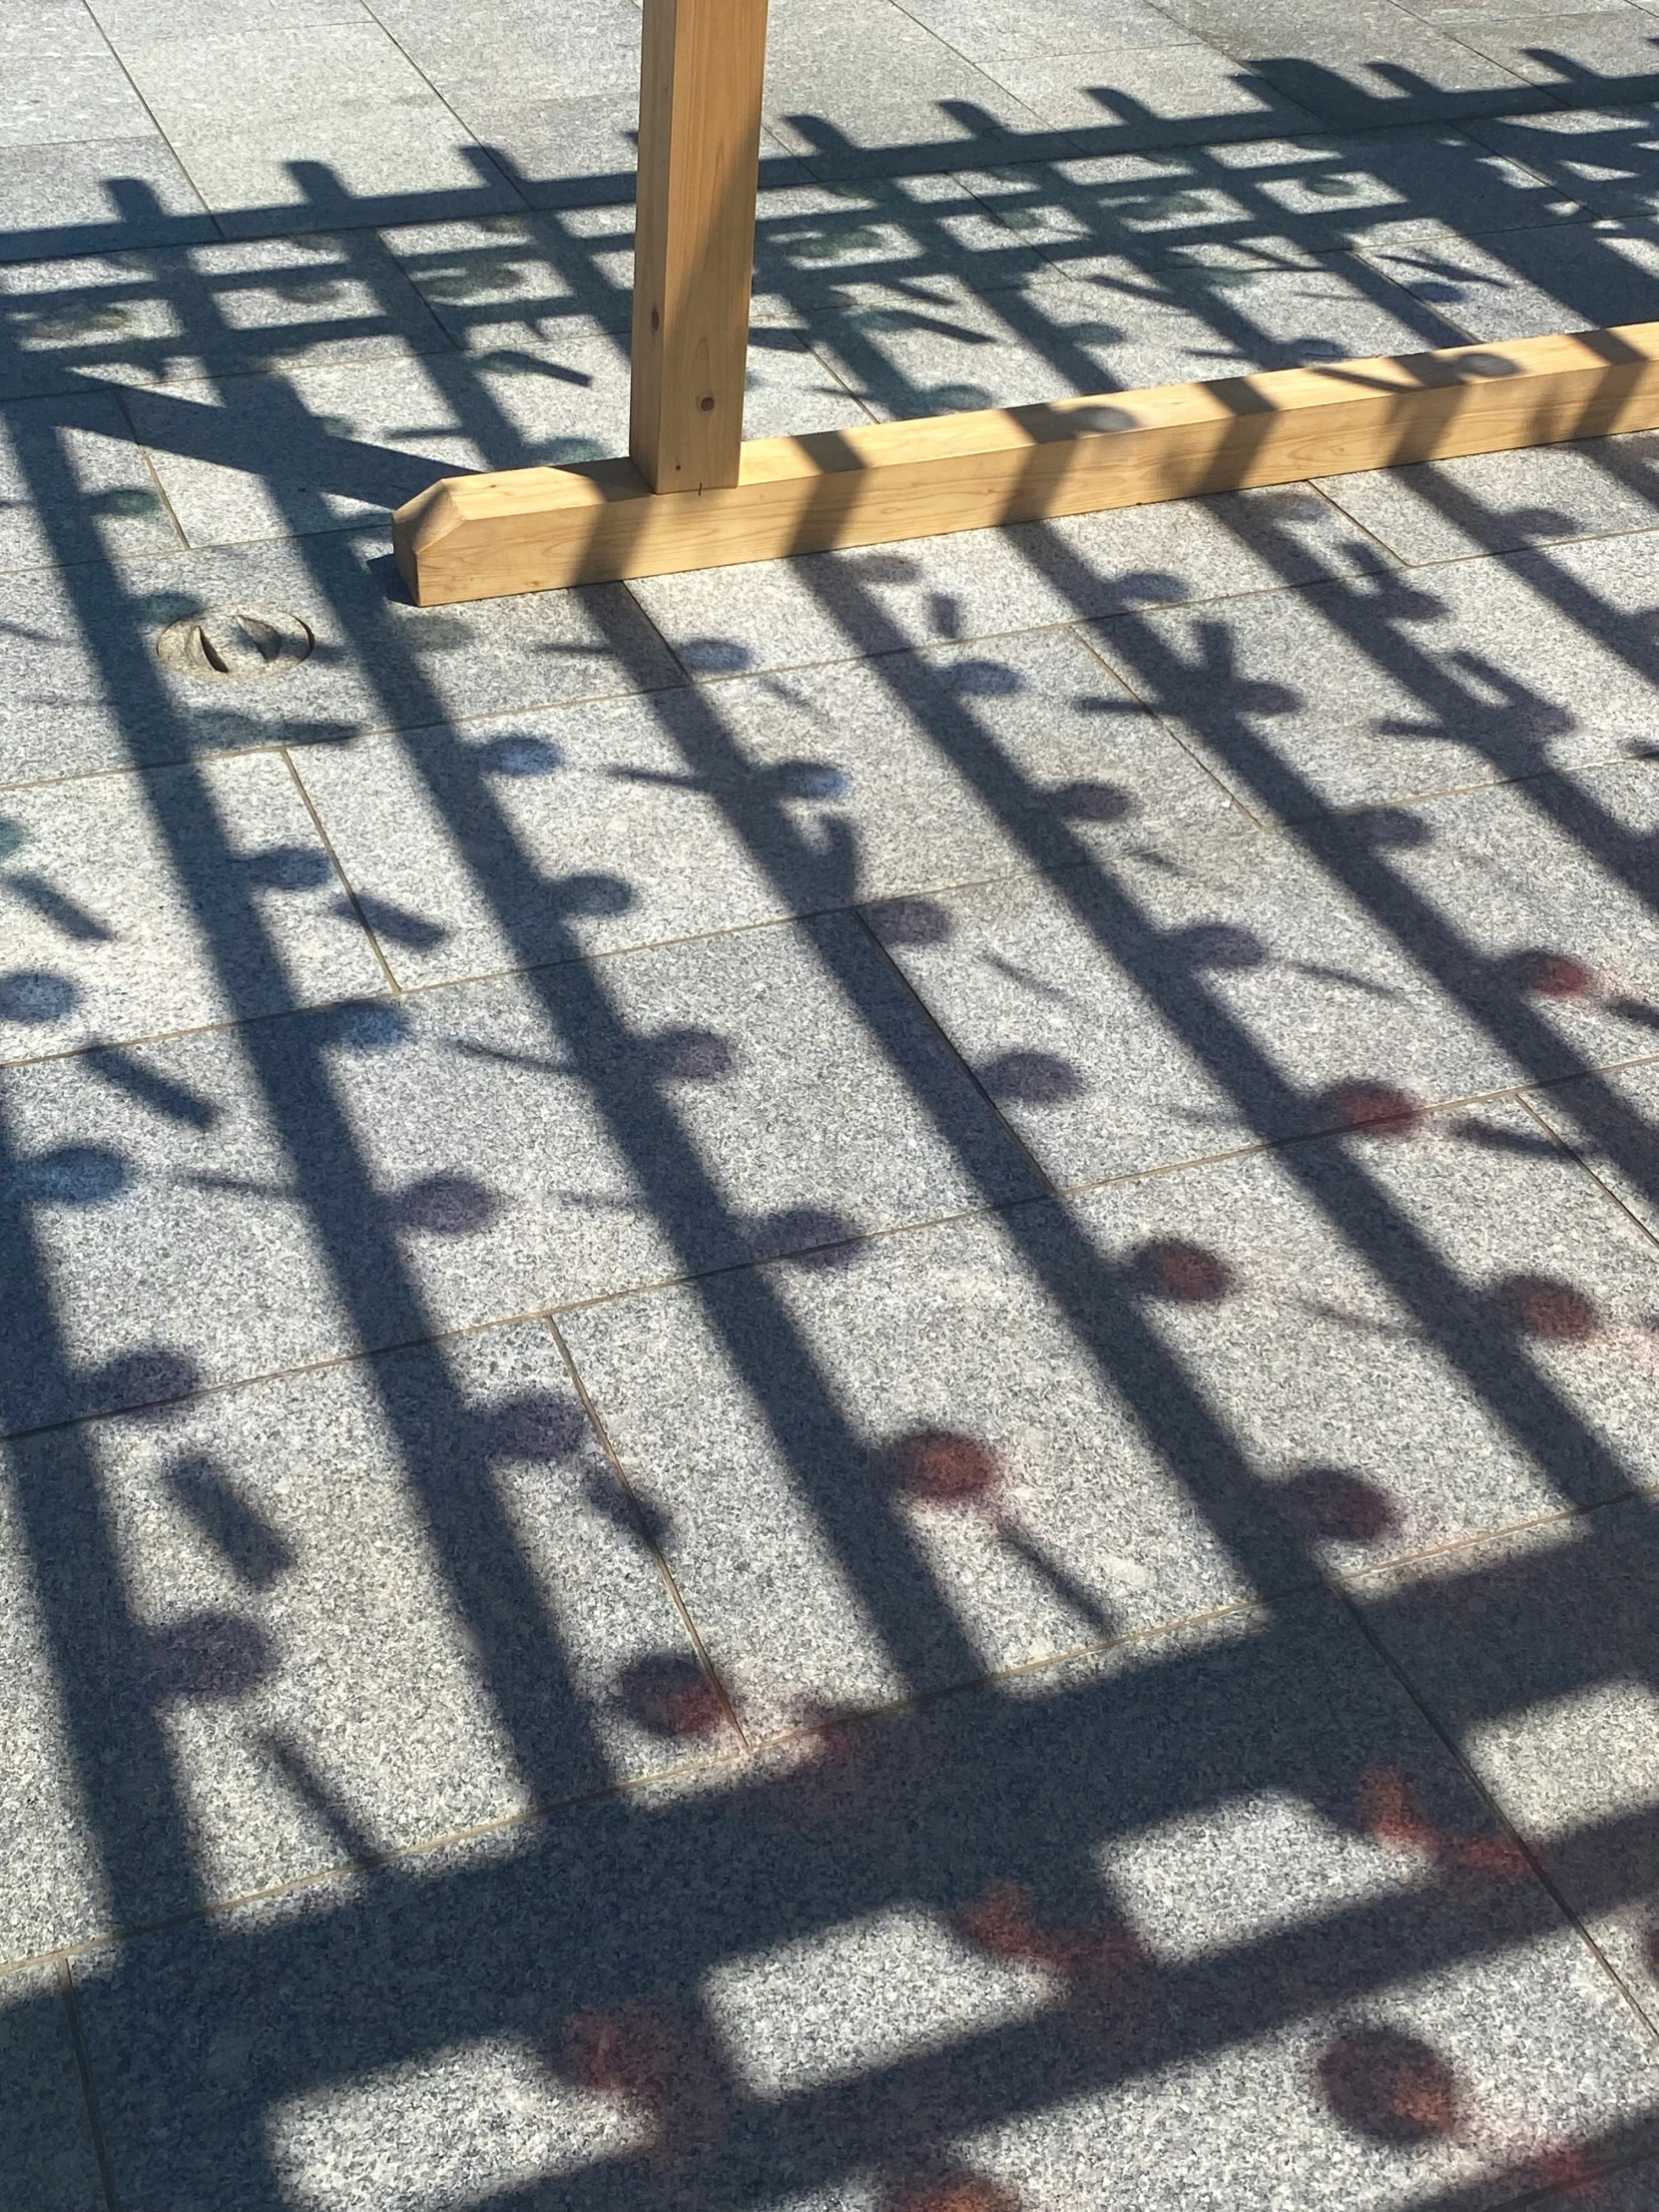 the shadows of bars and people on the sidewalk